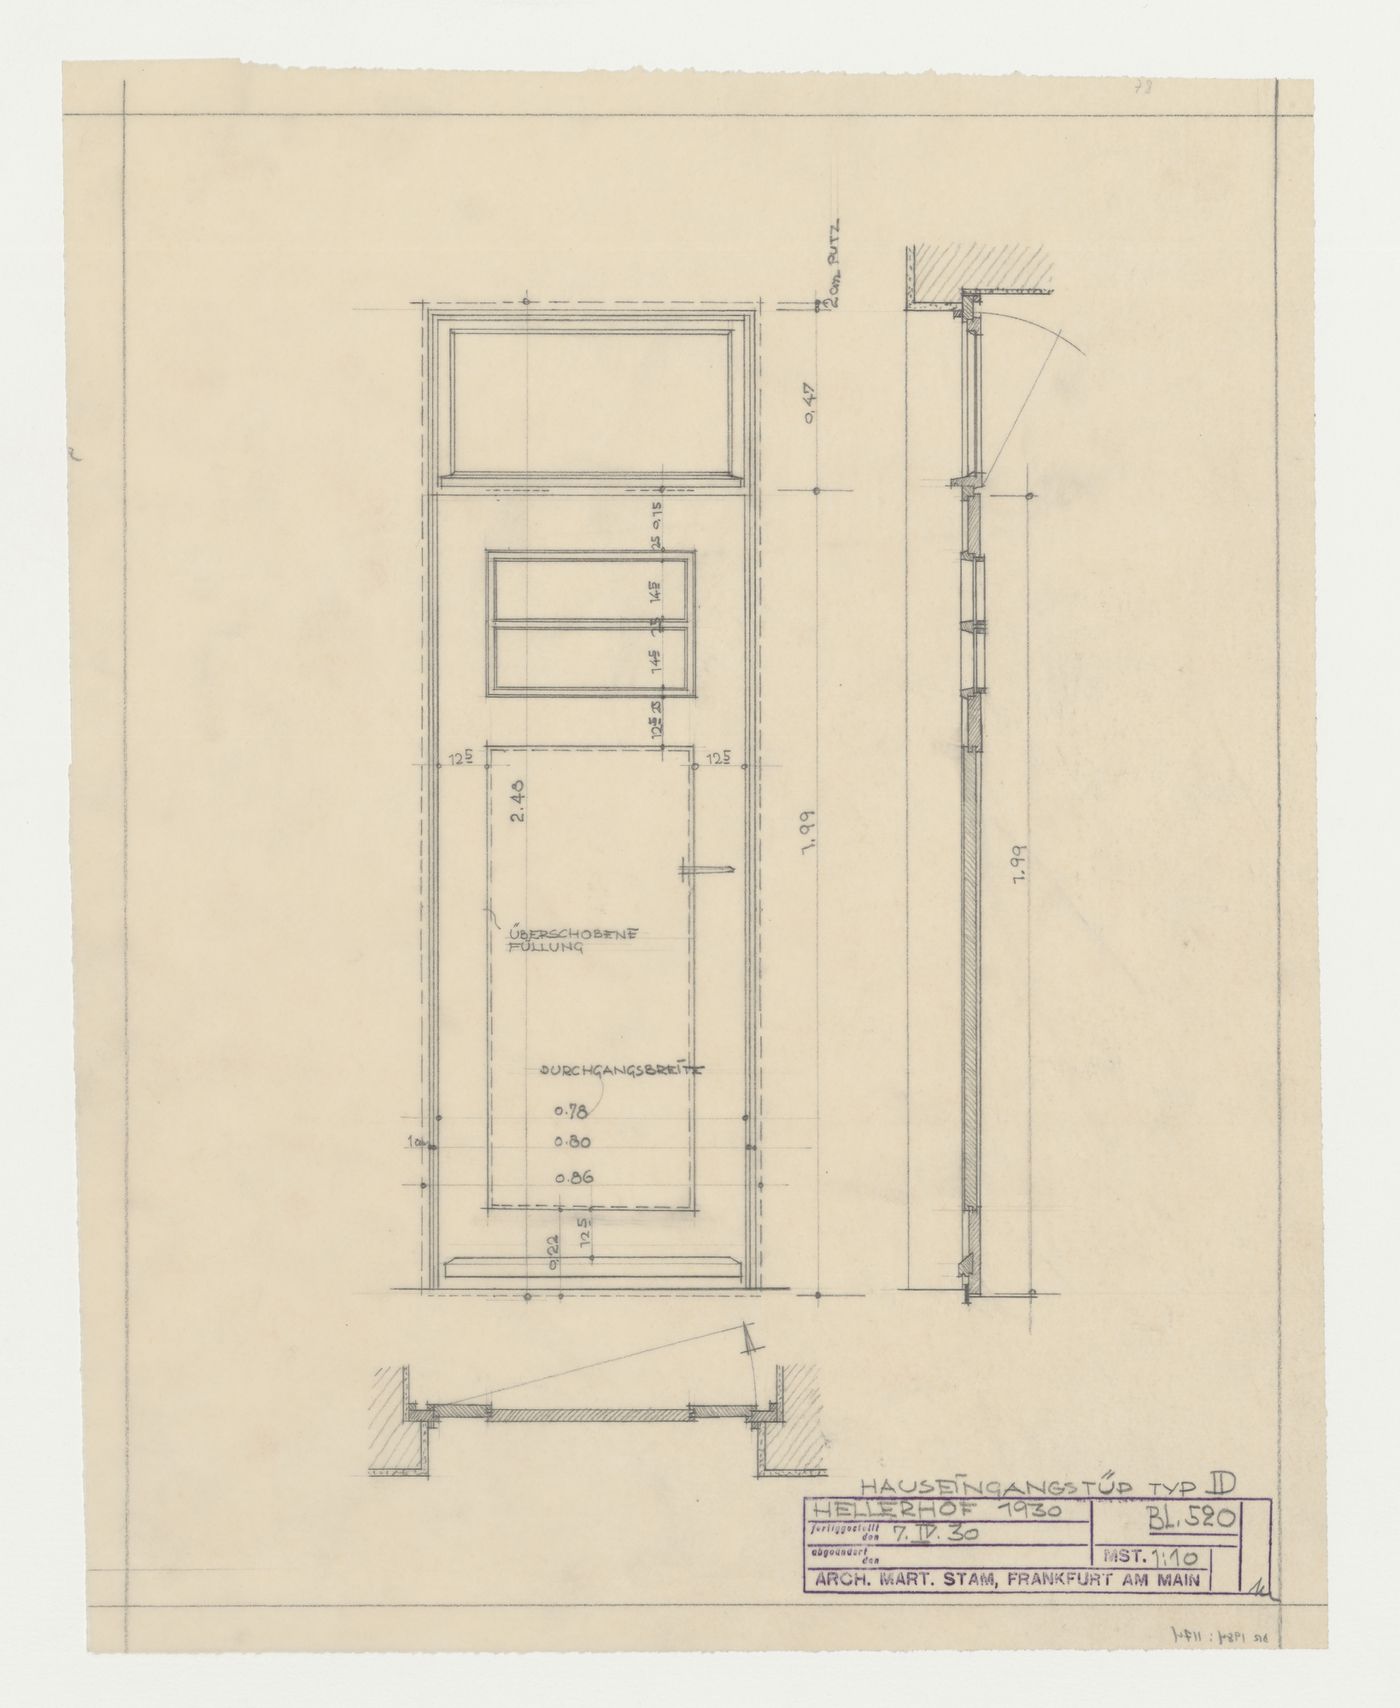 Plan, elevation, and section for a door for a type D housing unit, Hellerhof Housing Estate, Frankfurt am Main, Germany